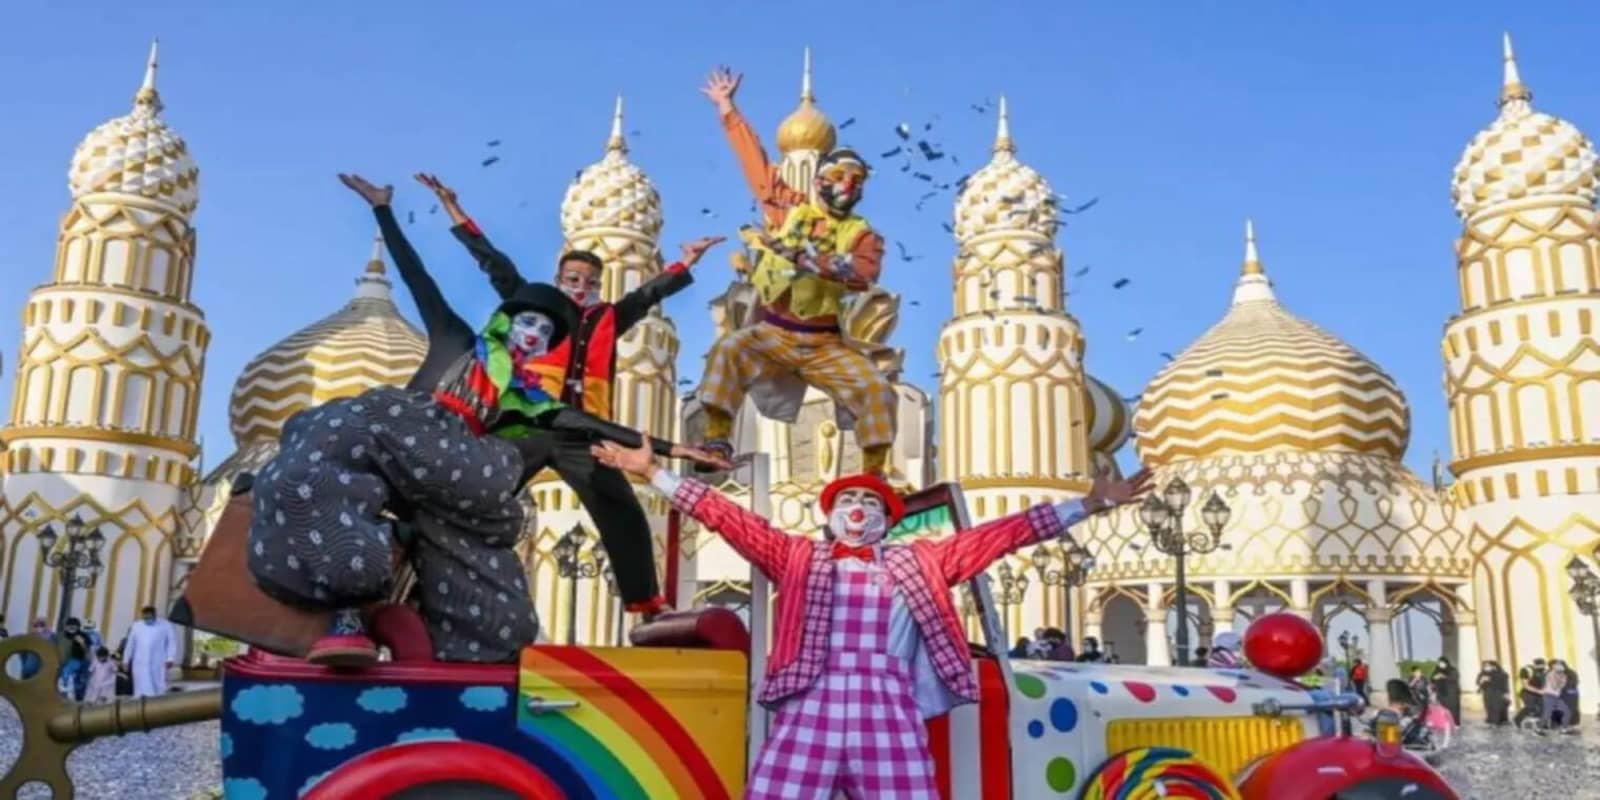 Global Village Tickets 24 Off Get Instant Discount Now